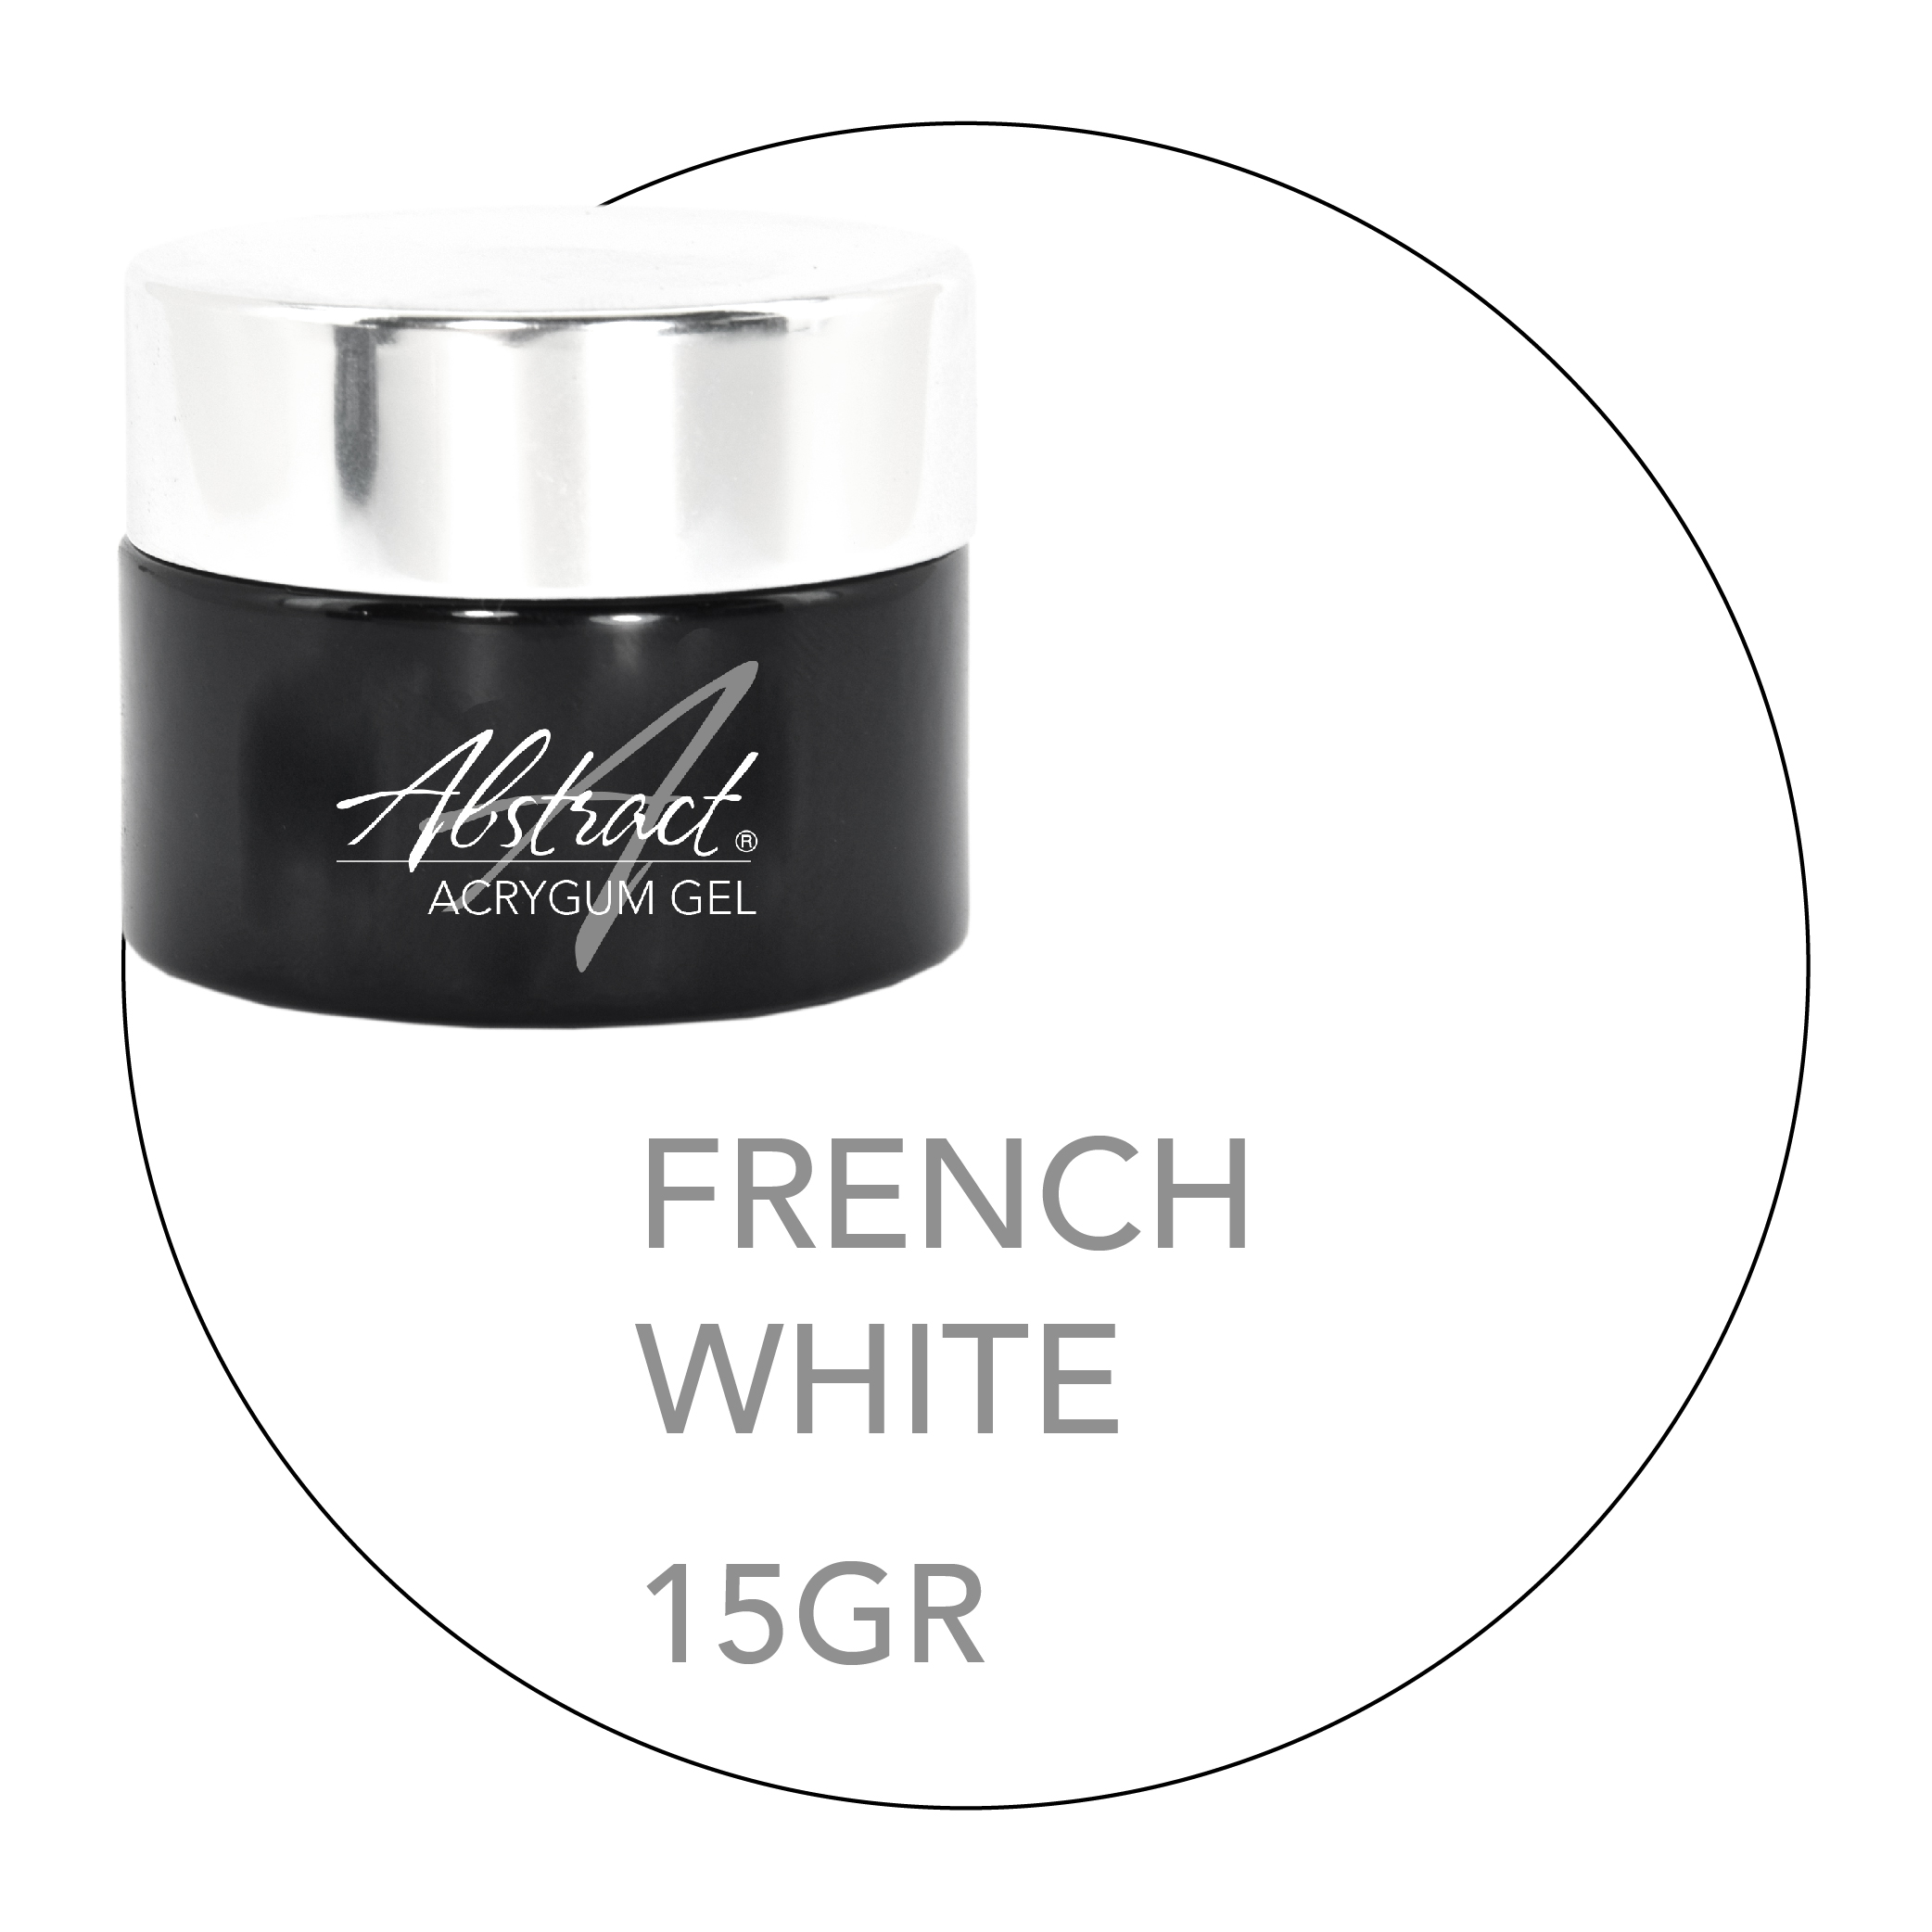 AcryGum Gel FRENCH WHITE 15gr, Abstract | 166651